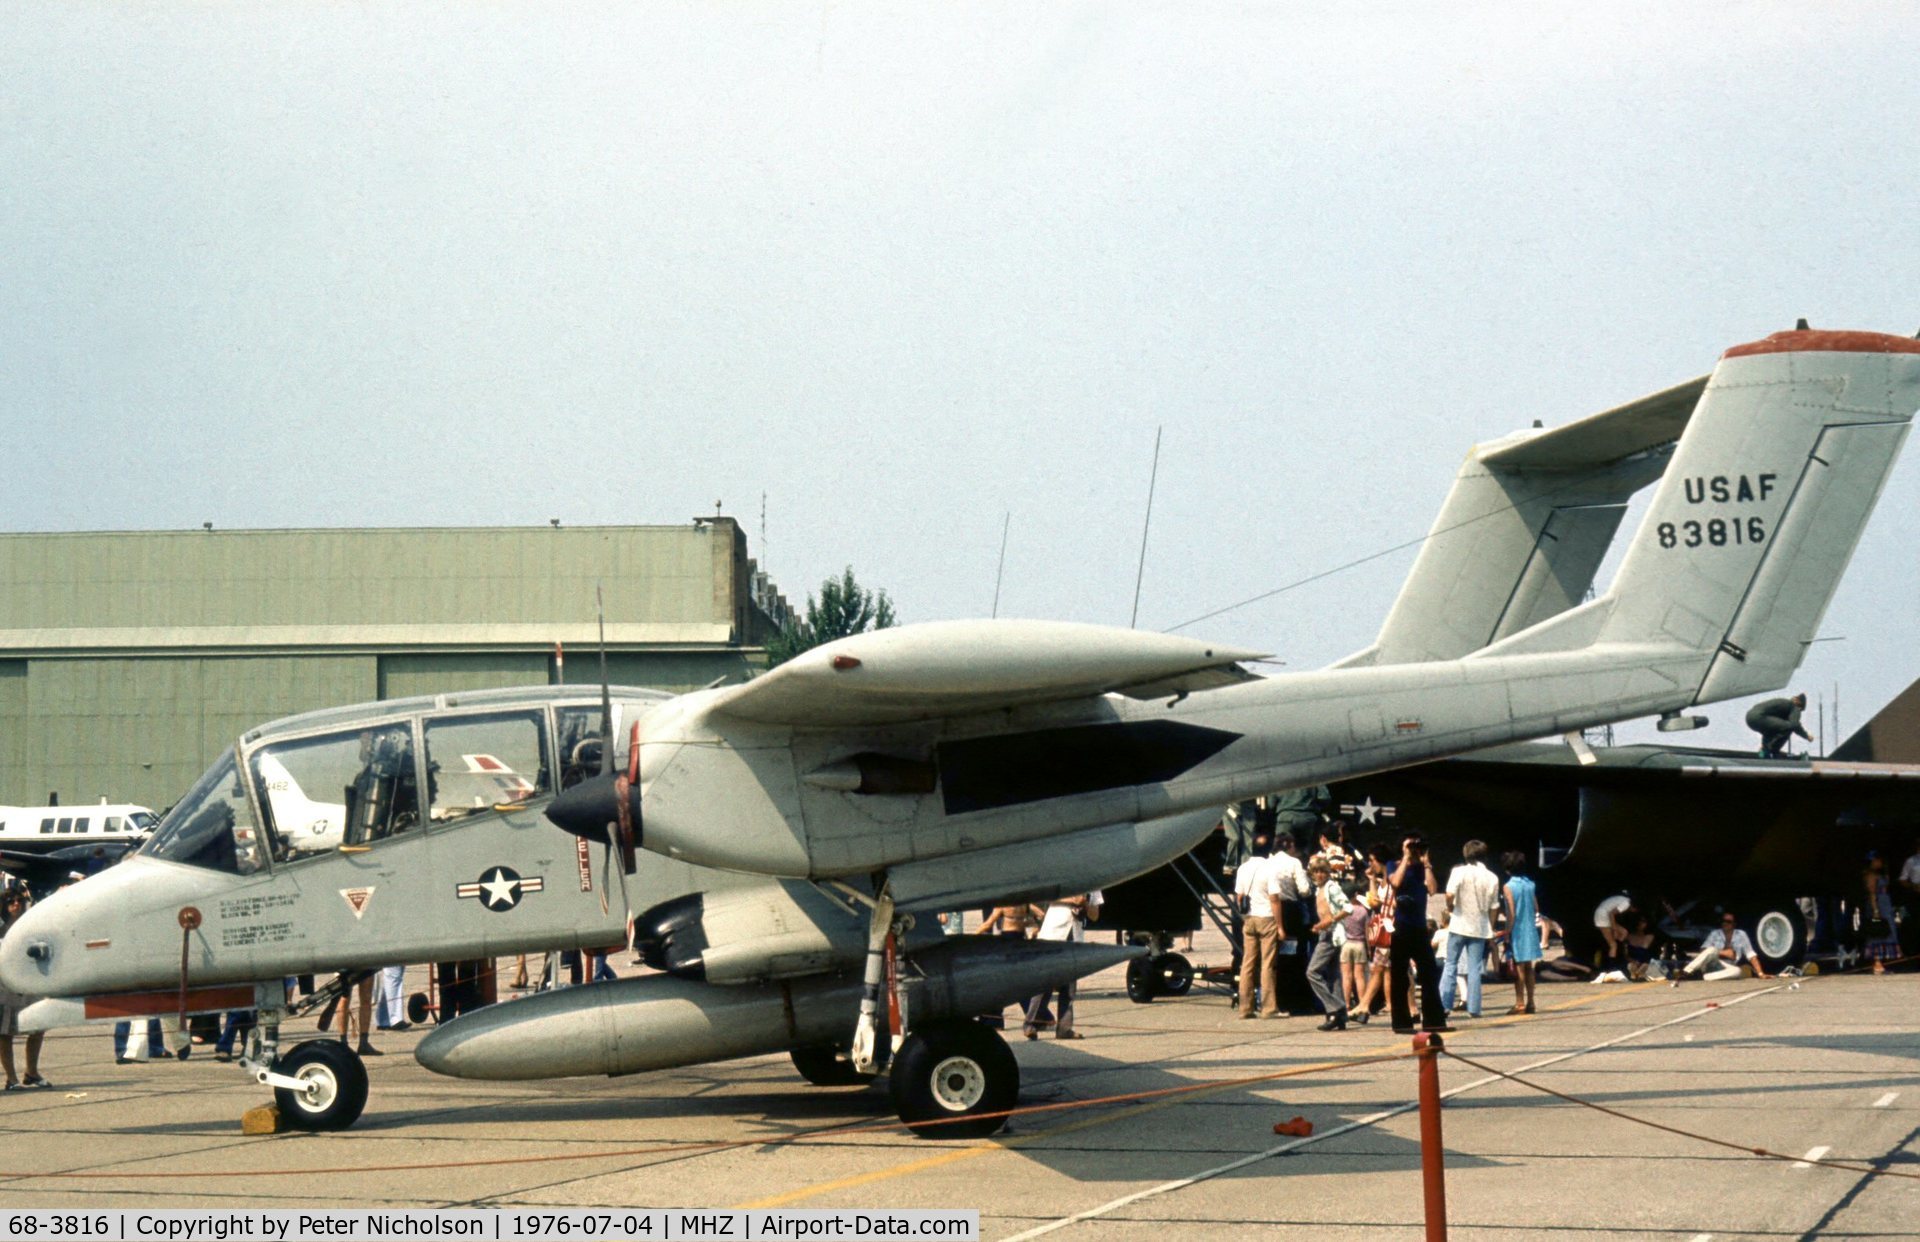 68-3816, 1968 North American Rockwell OV-10A Bronco C/N 321-142, OV-10A Bronco of the 601st Tactical Control Wing on display at the 1976 Mildenhall Air Fete.